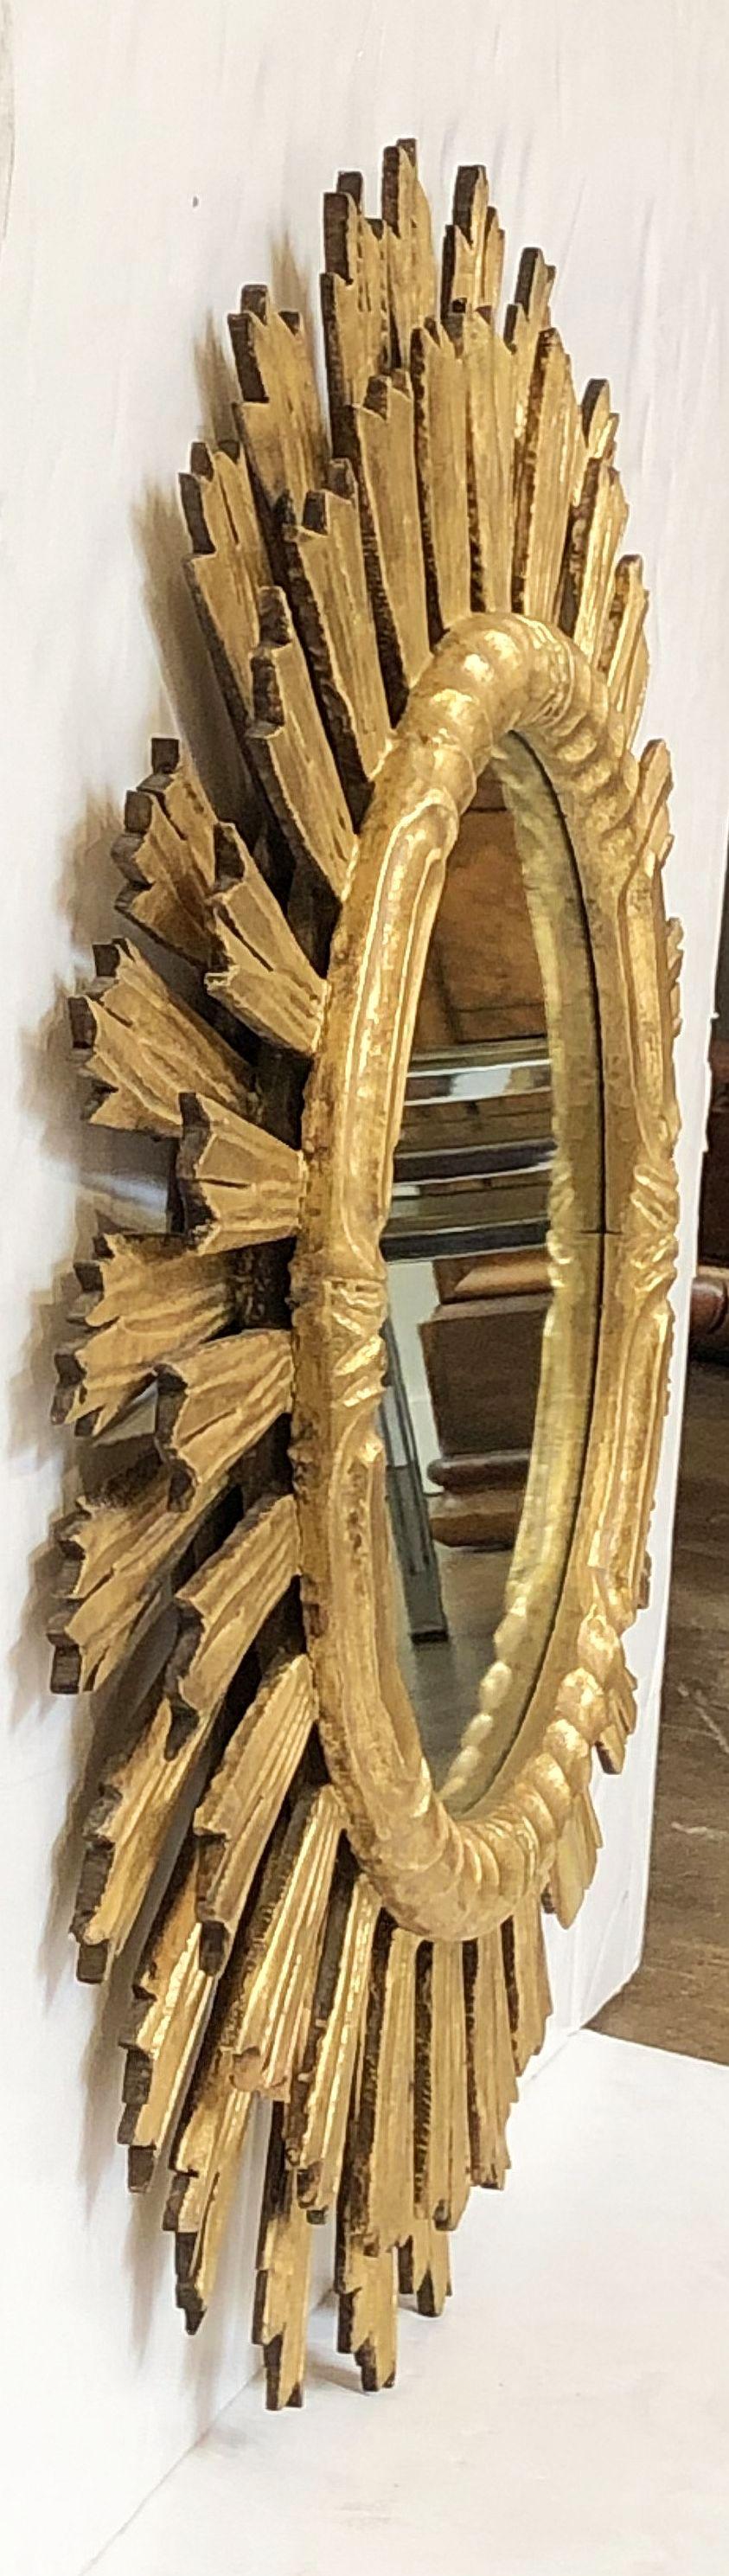 A lovely large French gilt sunburst (or starburst) mirror, 29 inches diameter with round mirrored glass center in a moulded frame.